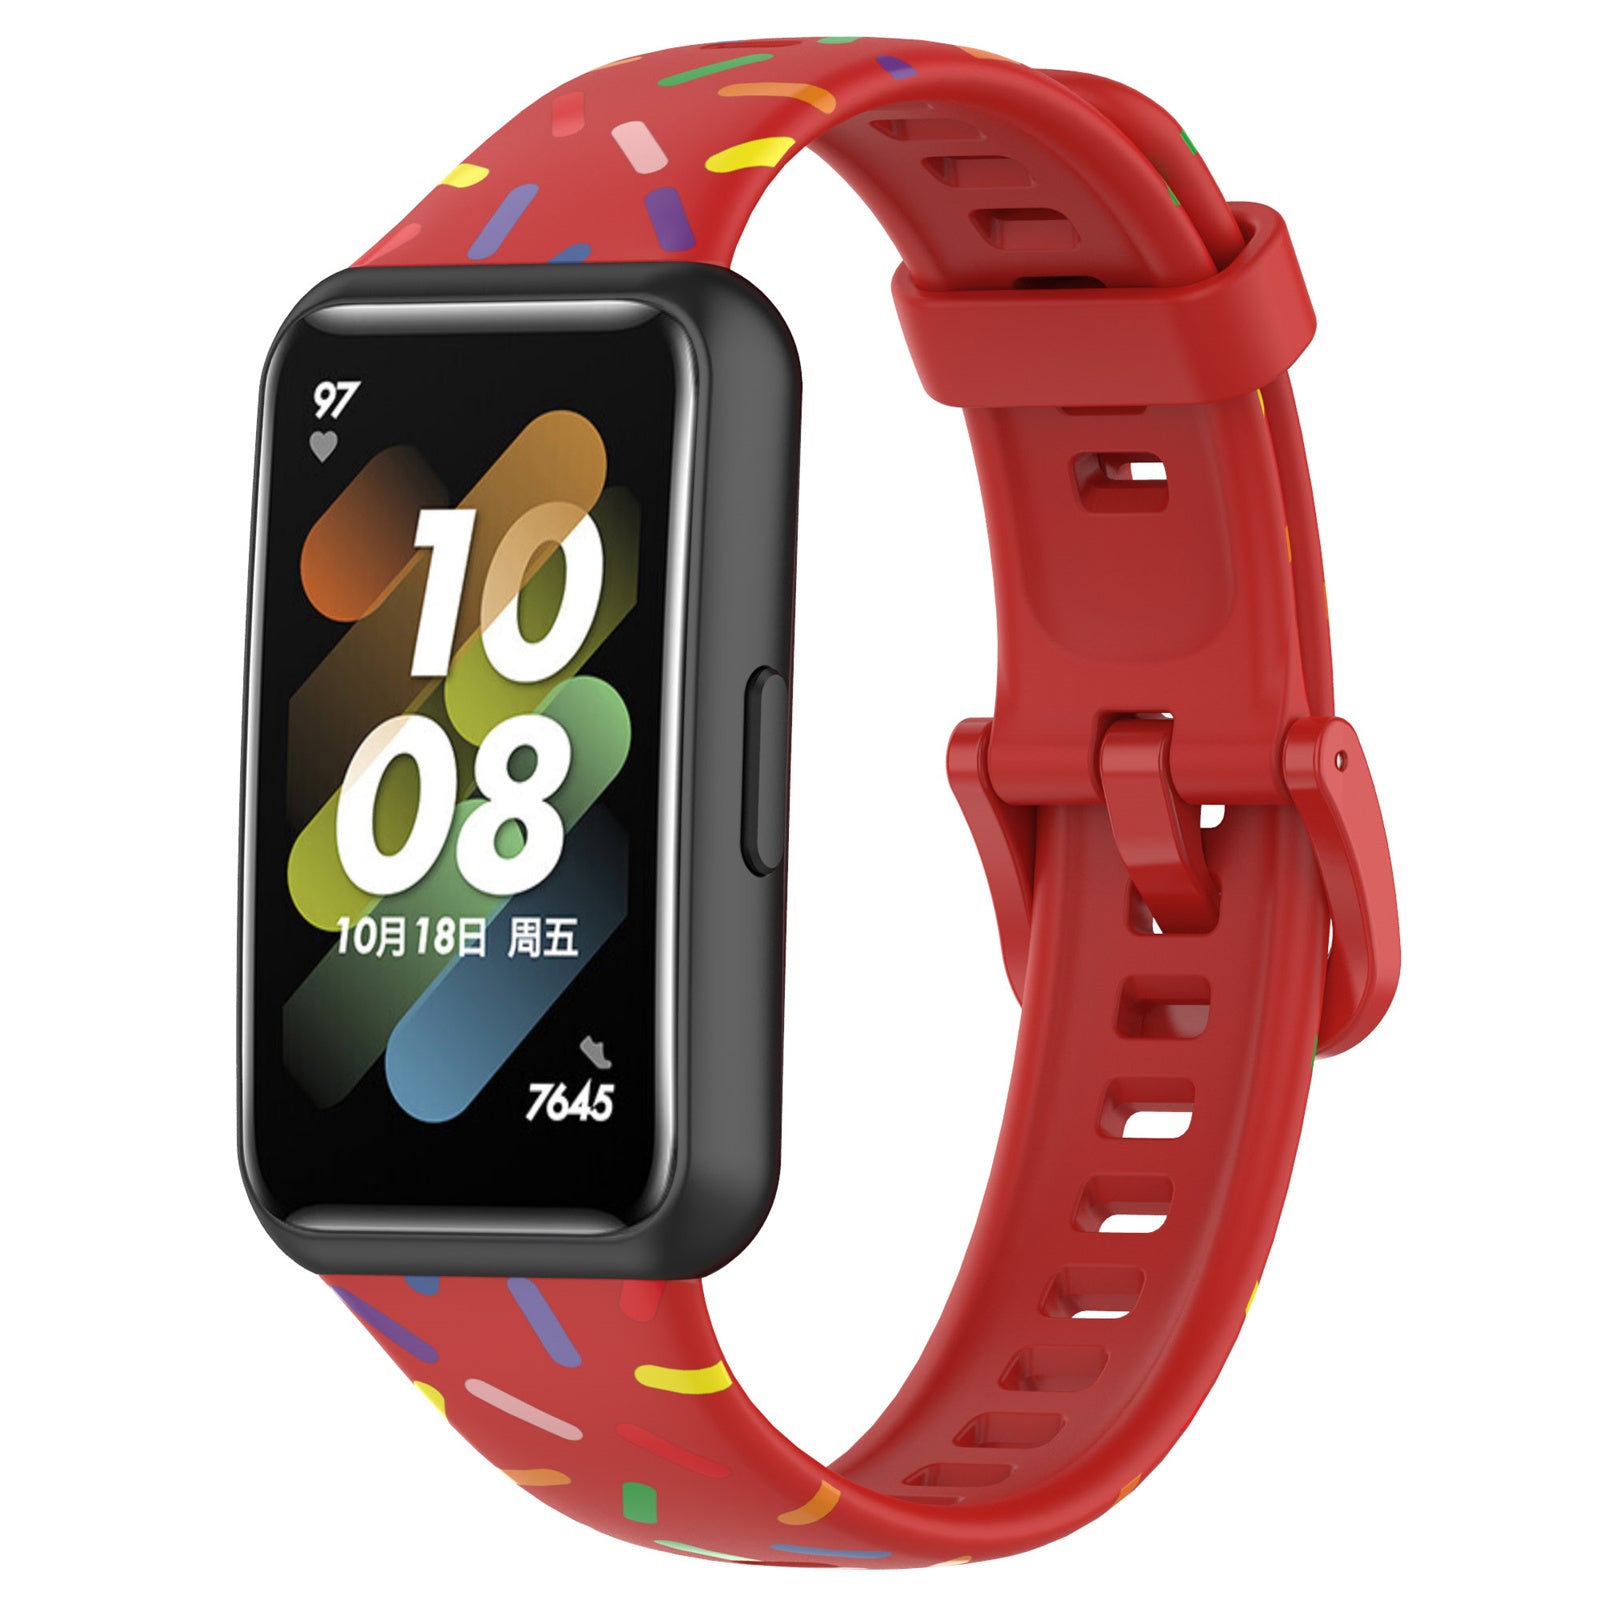 Uniqkart for Huawei Band 7 Colorful Spotted Wrist Band Replacement Silicone Watch Strap - Red